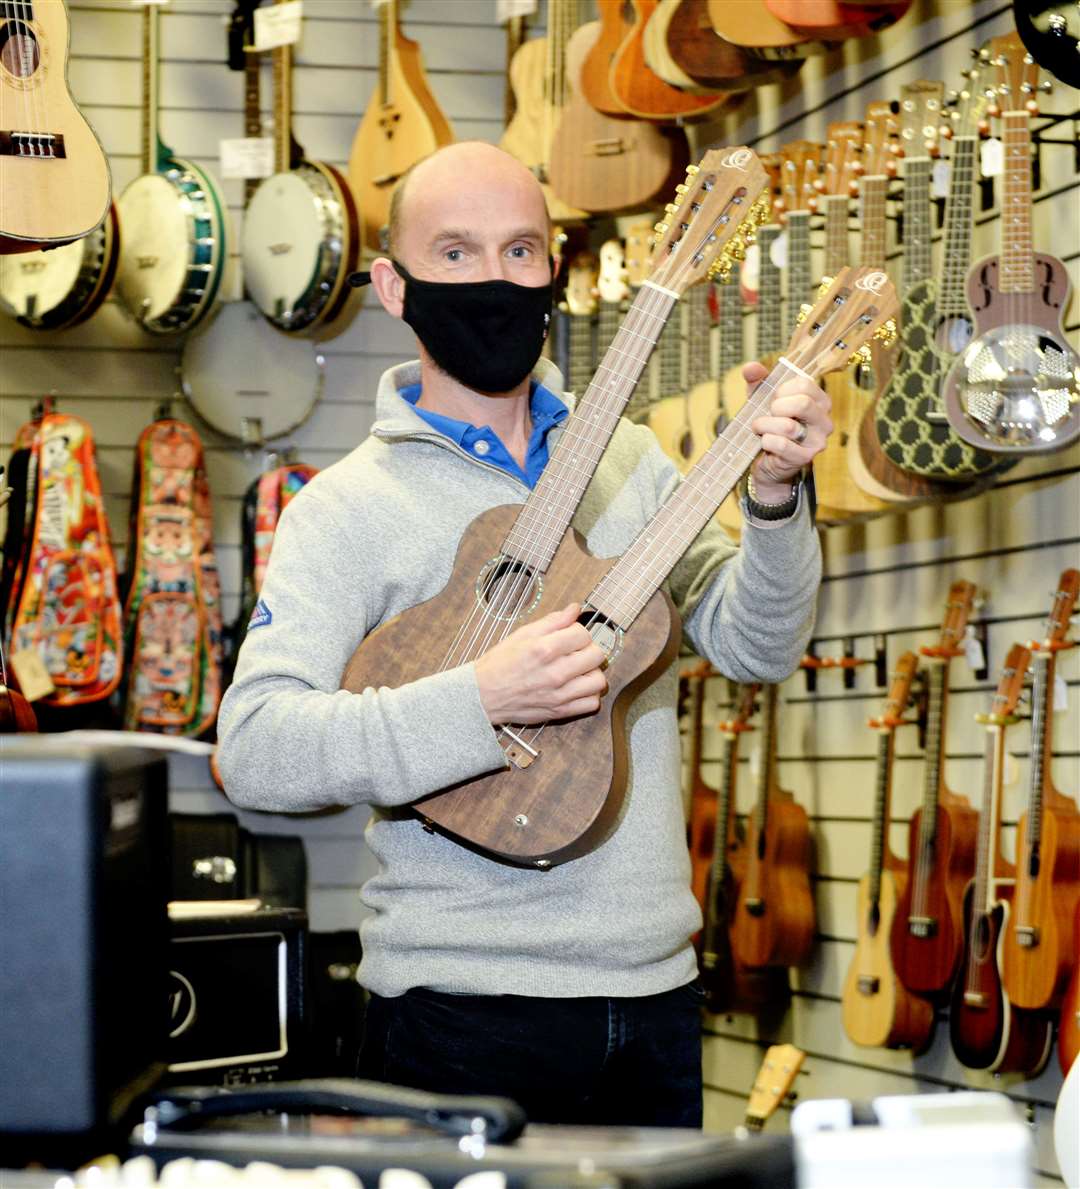 Roger Catherwood, owner of The Music Shop, with a twin necked ukulele.